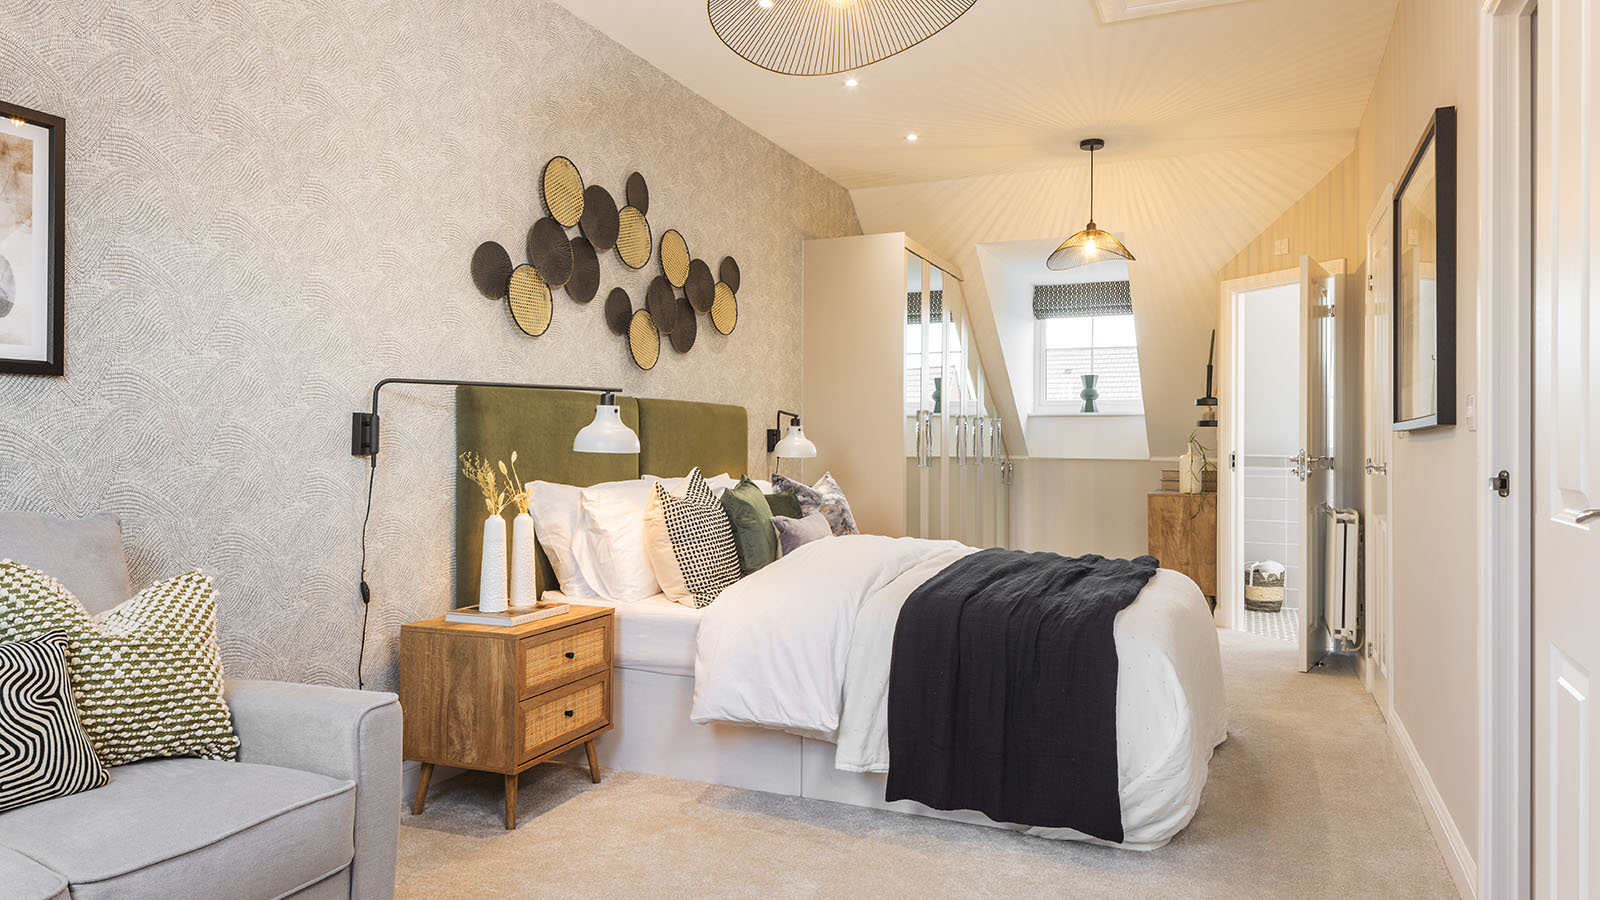 The ‘Norbury’ show home at The Poppies